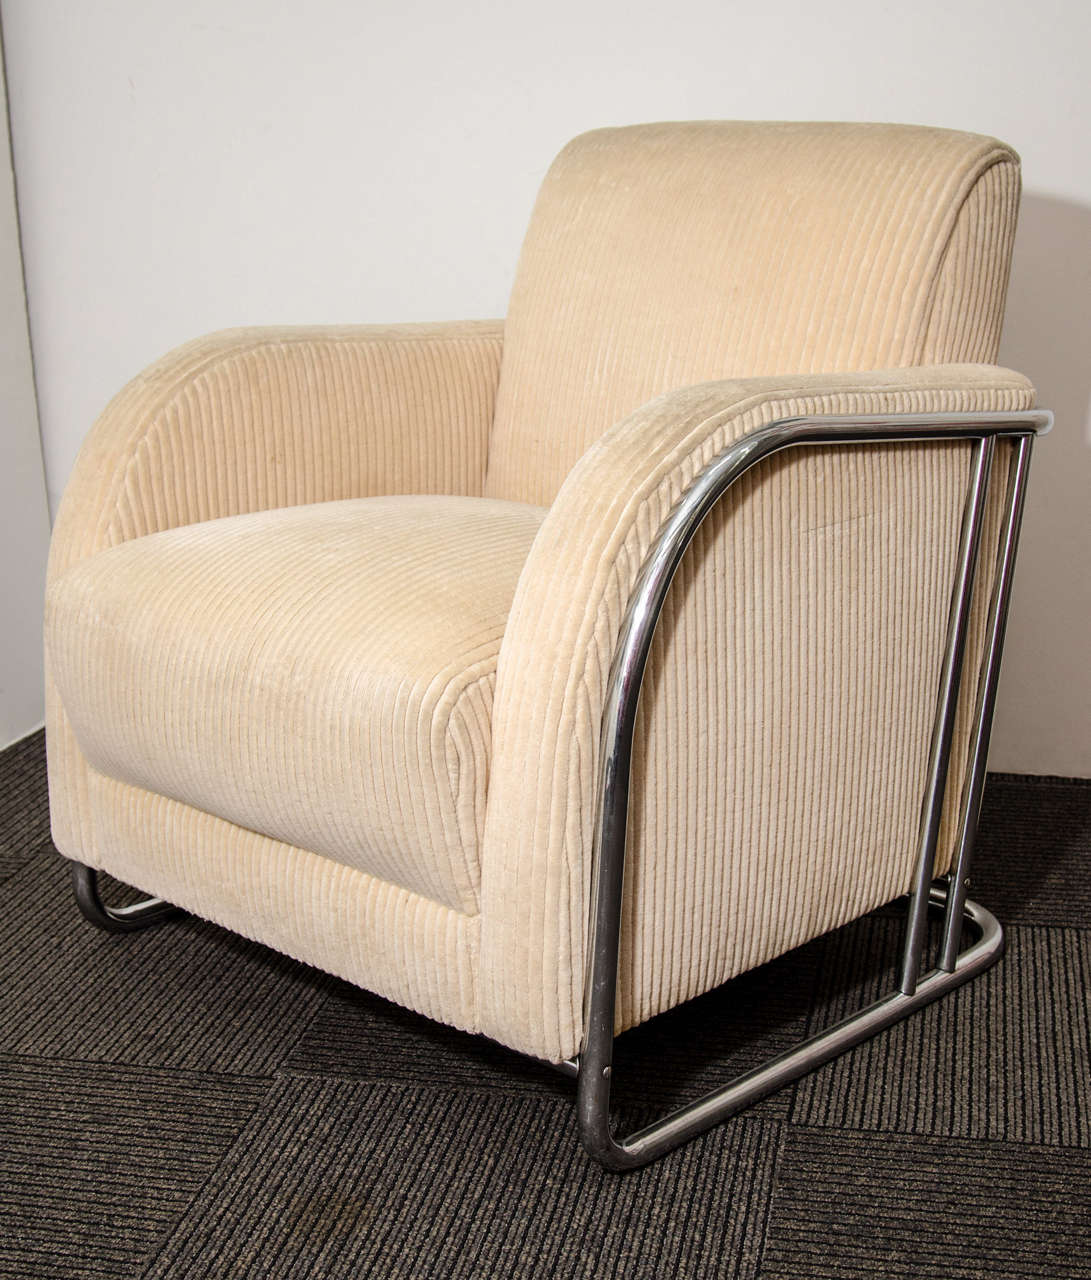 A rare Art Deco lounge chair in white whaled velvet with a tubular steel frame. The piece is by Wolfgang Hoffmann.

Reduced from: $12,750